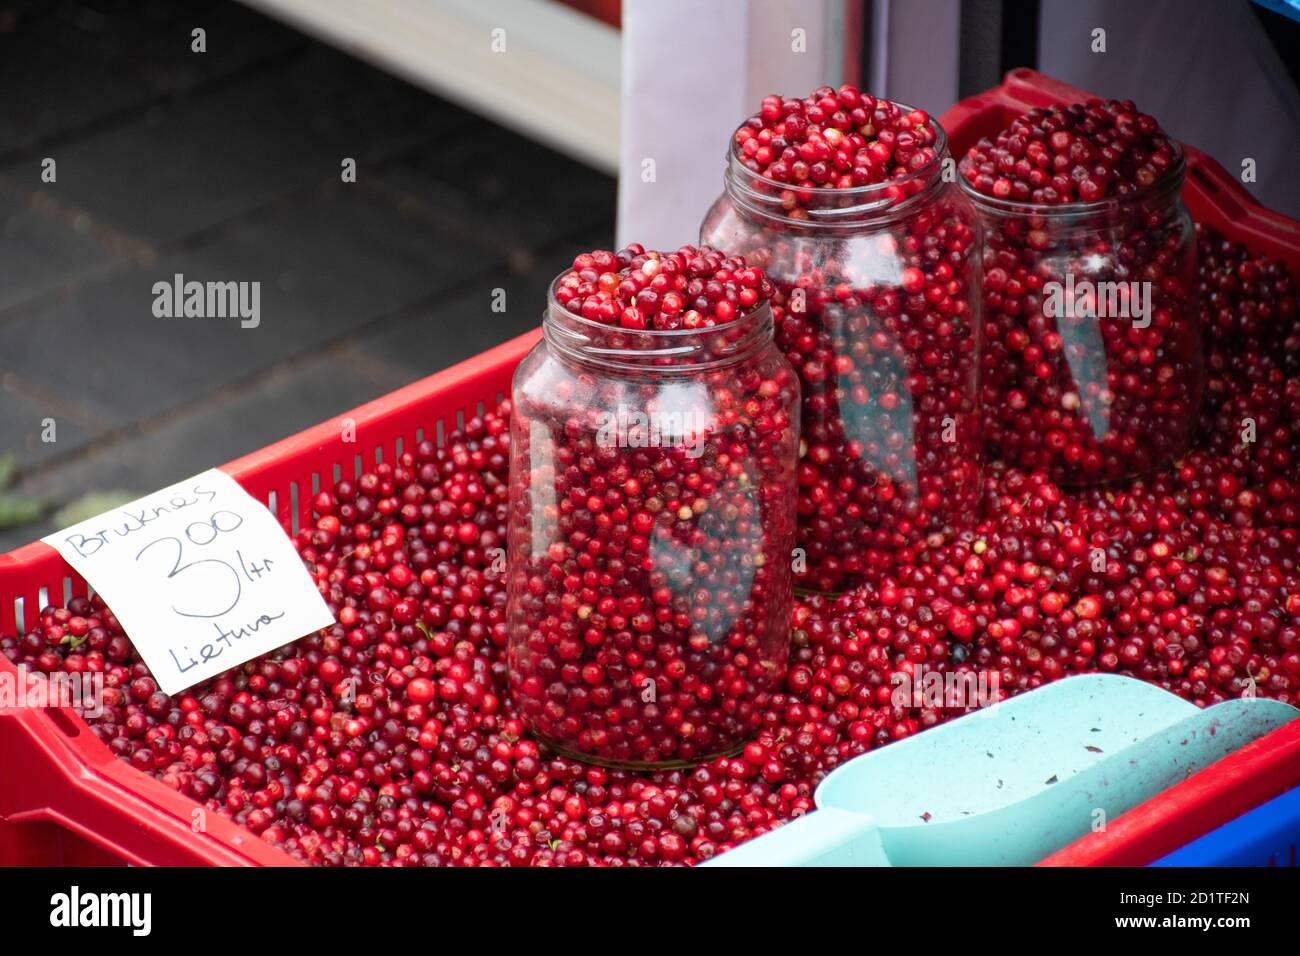 Red fresh healthy cranberries and lingonberries in a street food market ready to sell and eat, with glass jars Stock Photo